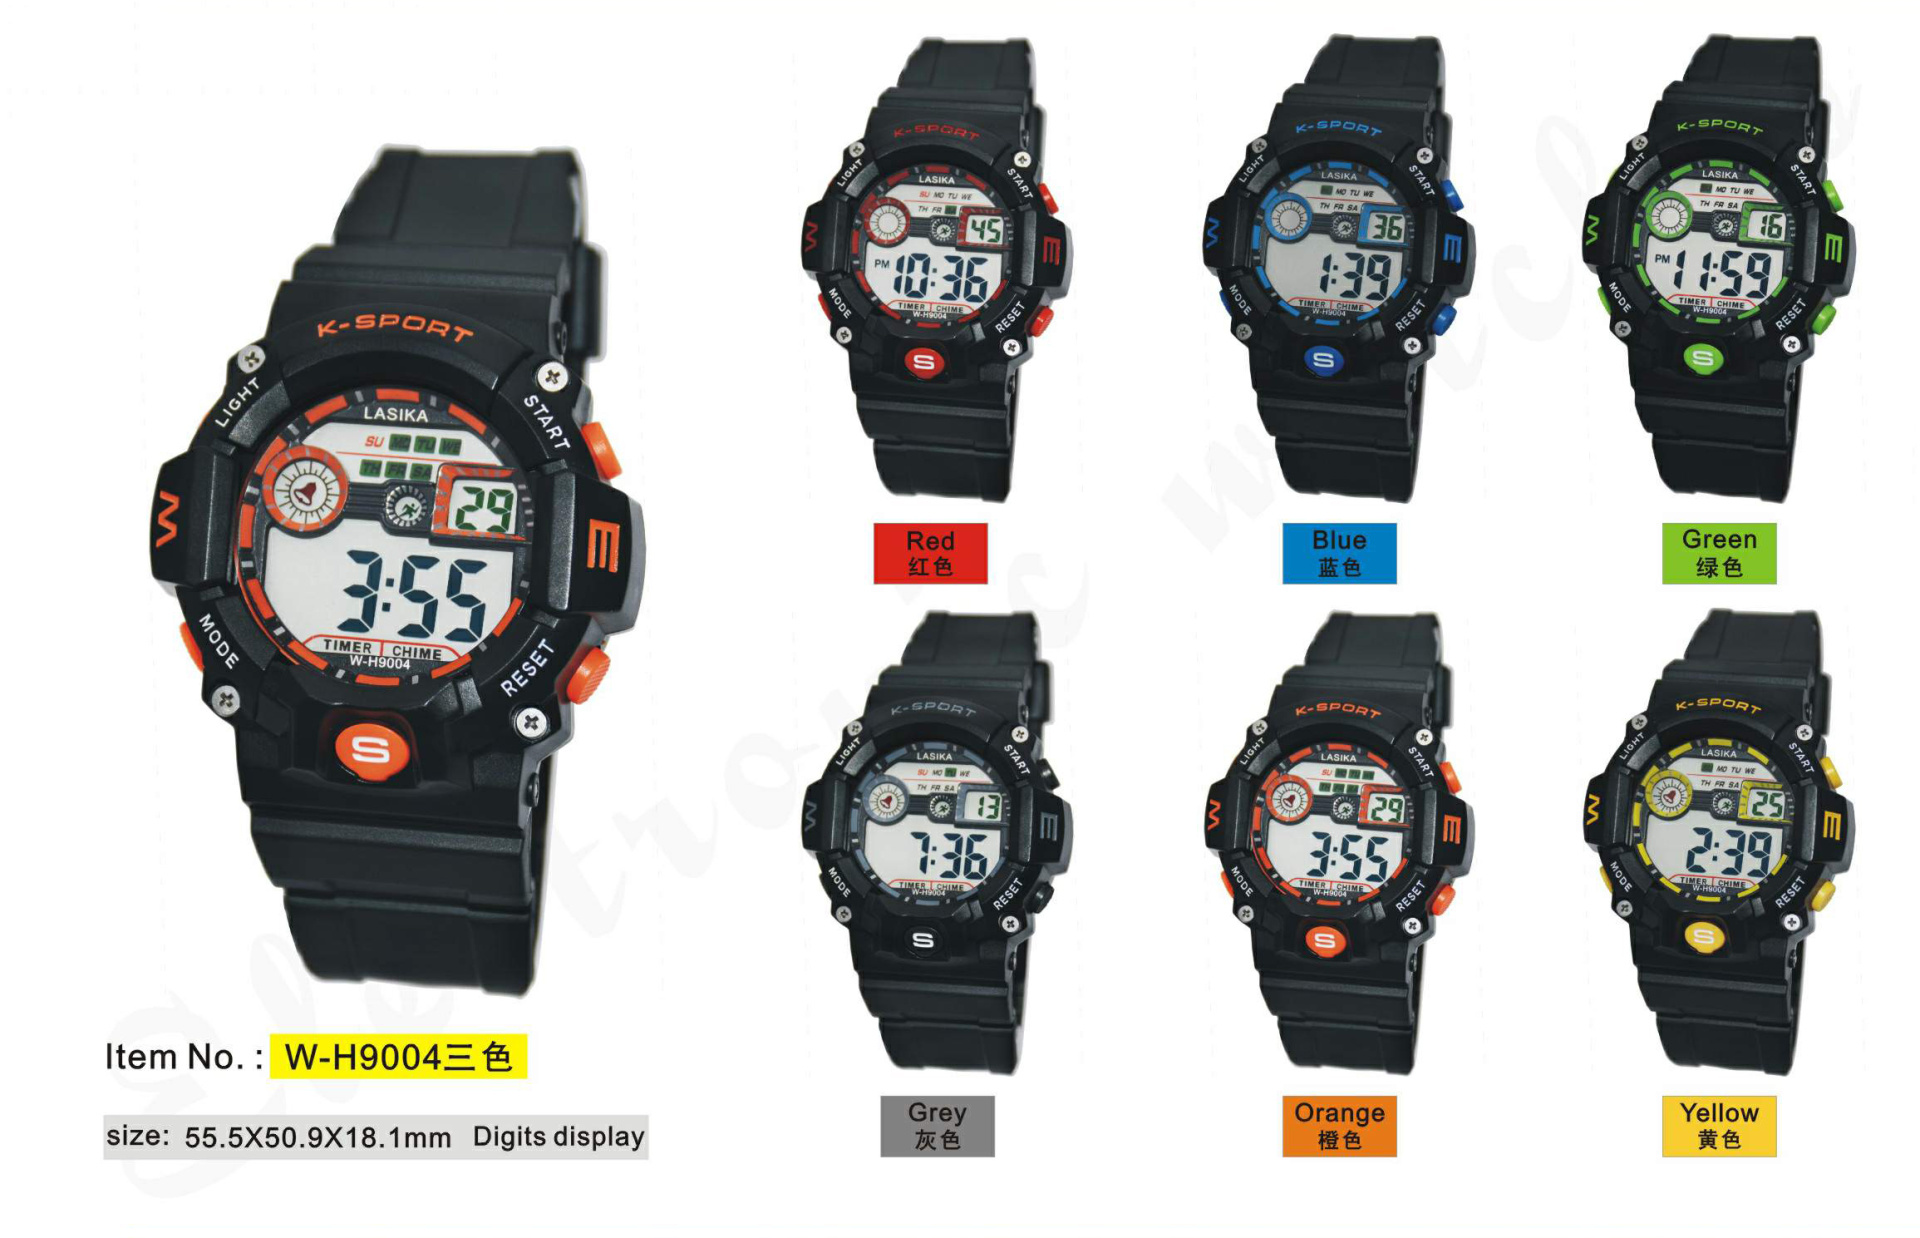 What are the main points of choosing the Wholesale Outdoor watch supplier